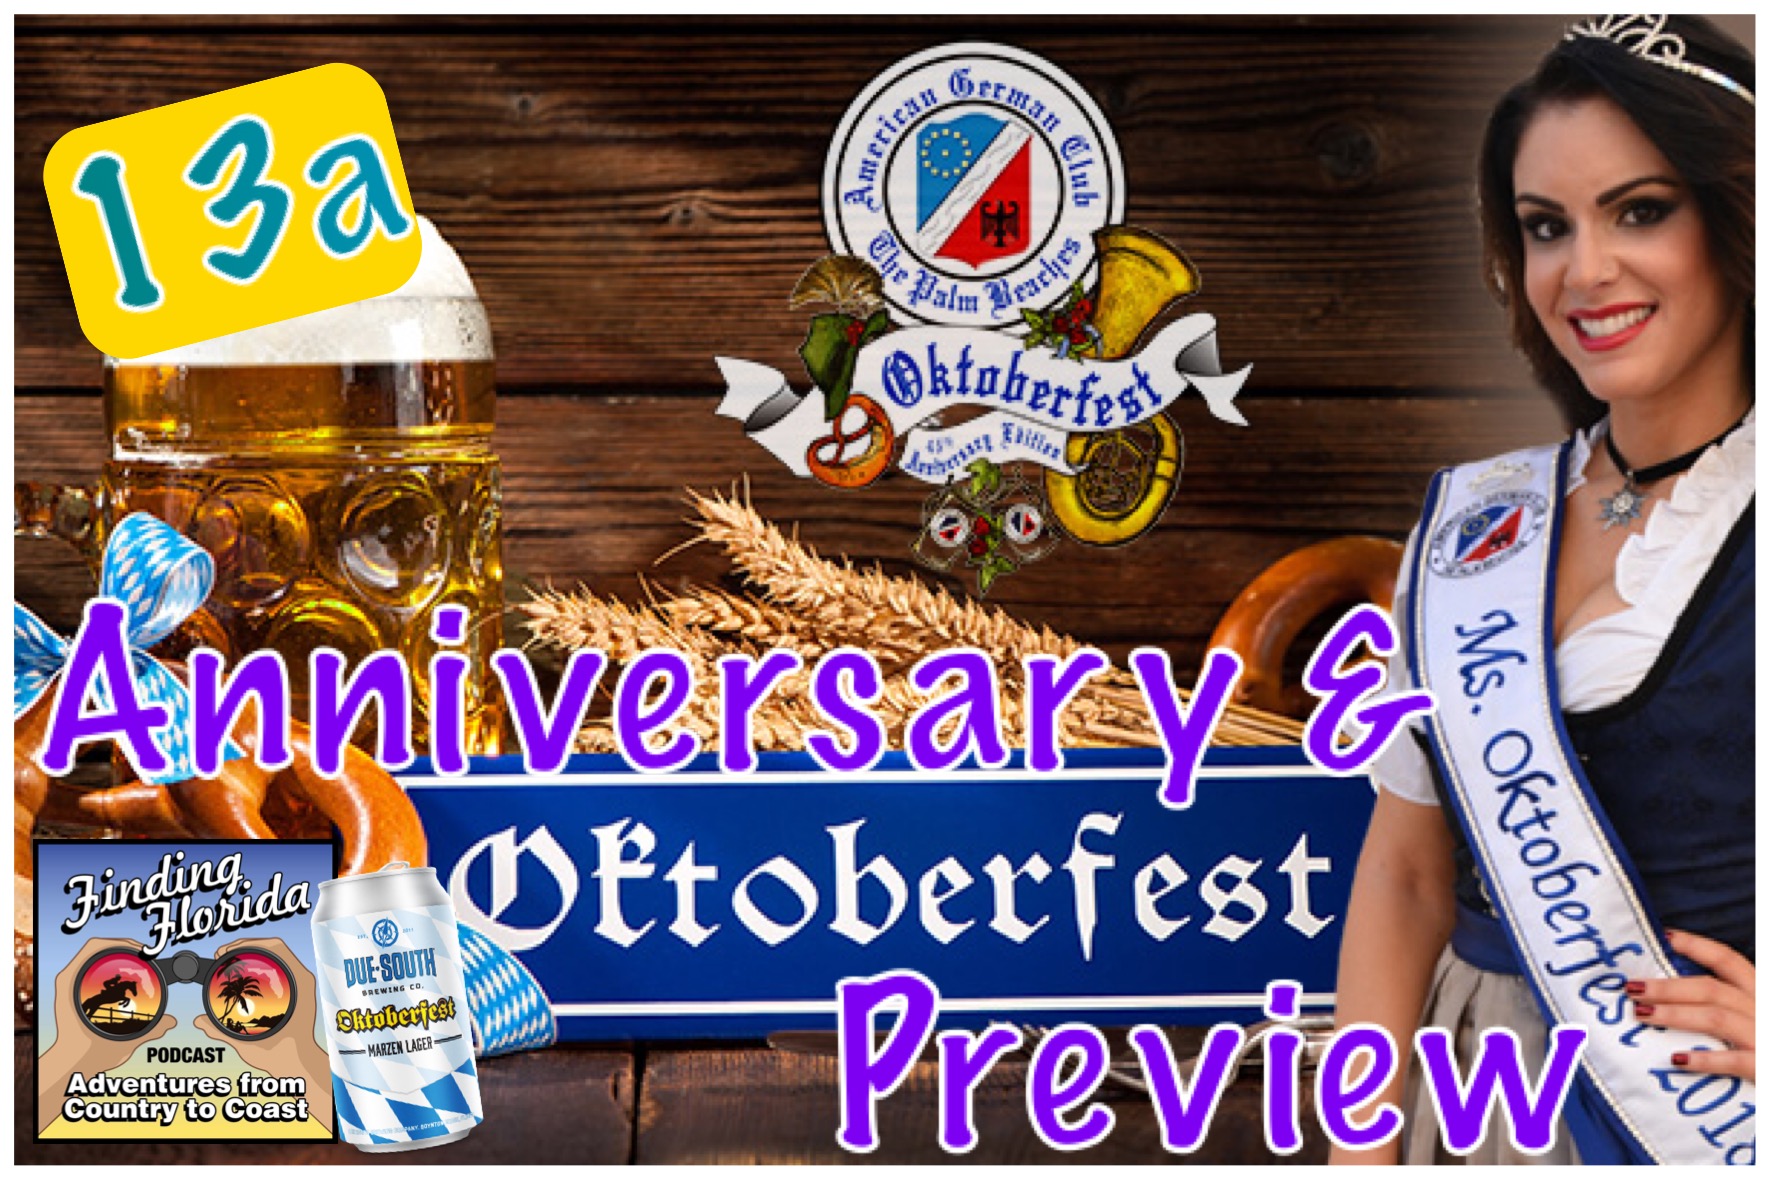 Look Ahead to Finding Florida's Anniversary and Oktoberfest Celebration